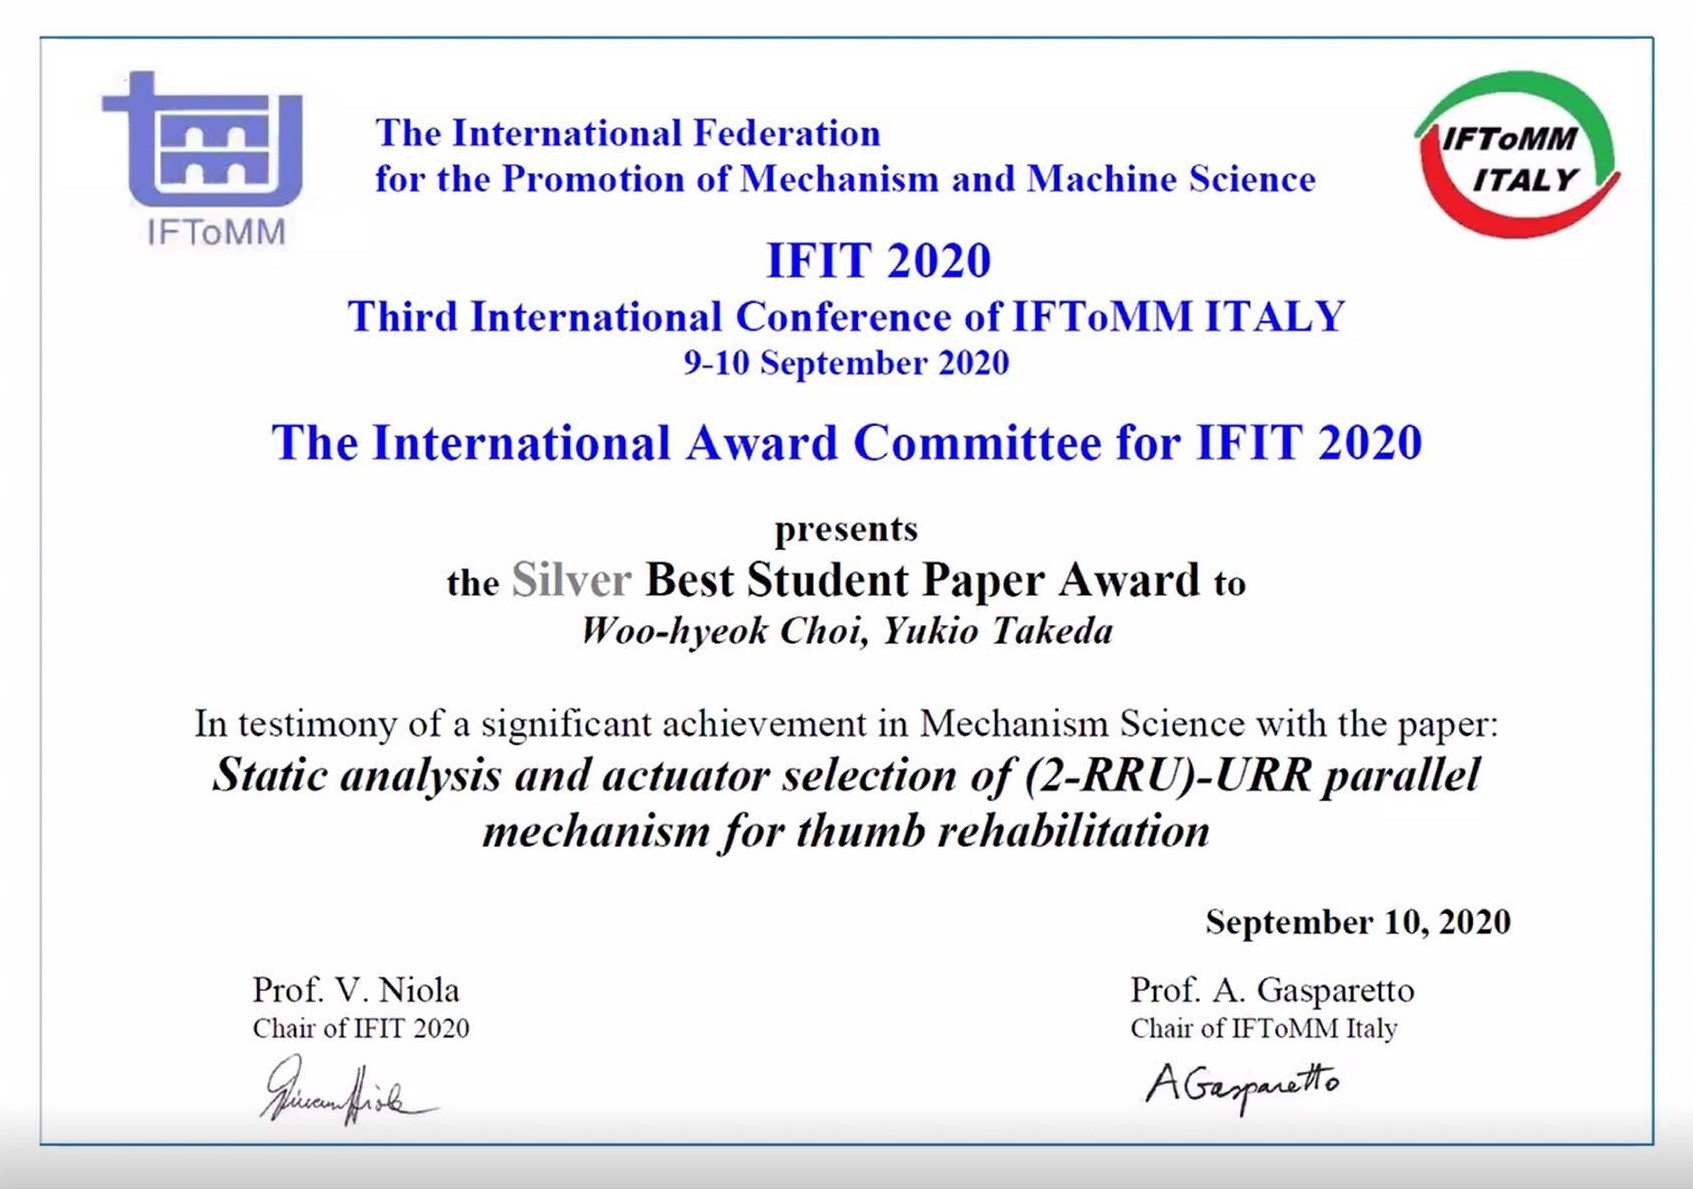 Choi Woohyeok won the Silver Best Student Paper Award at IFIT2020